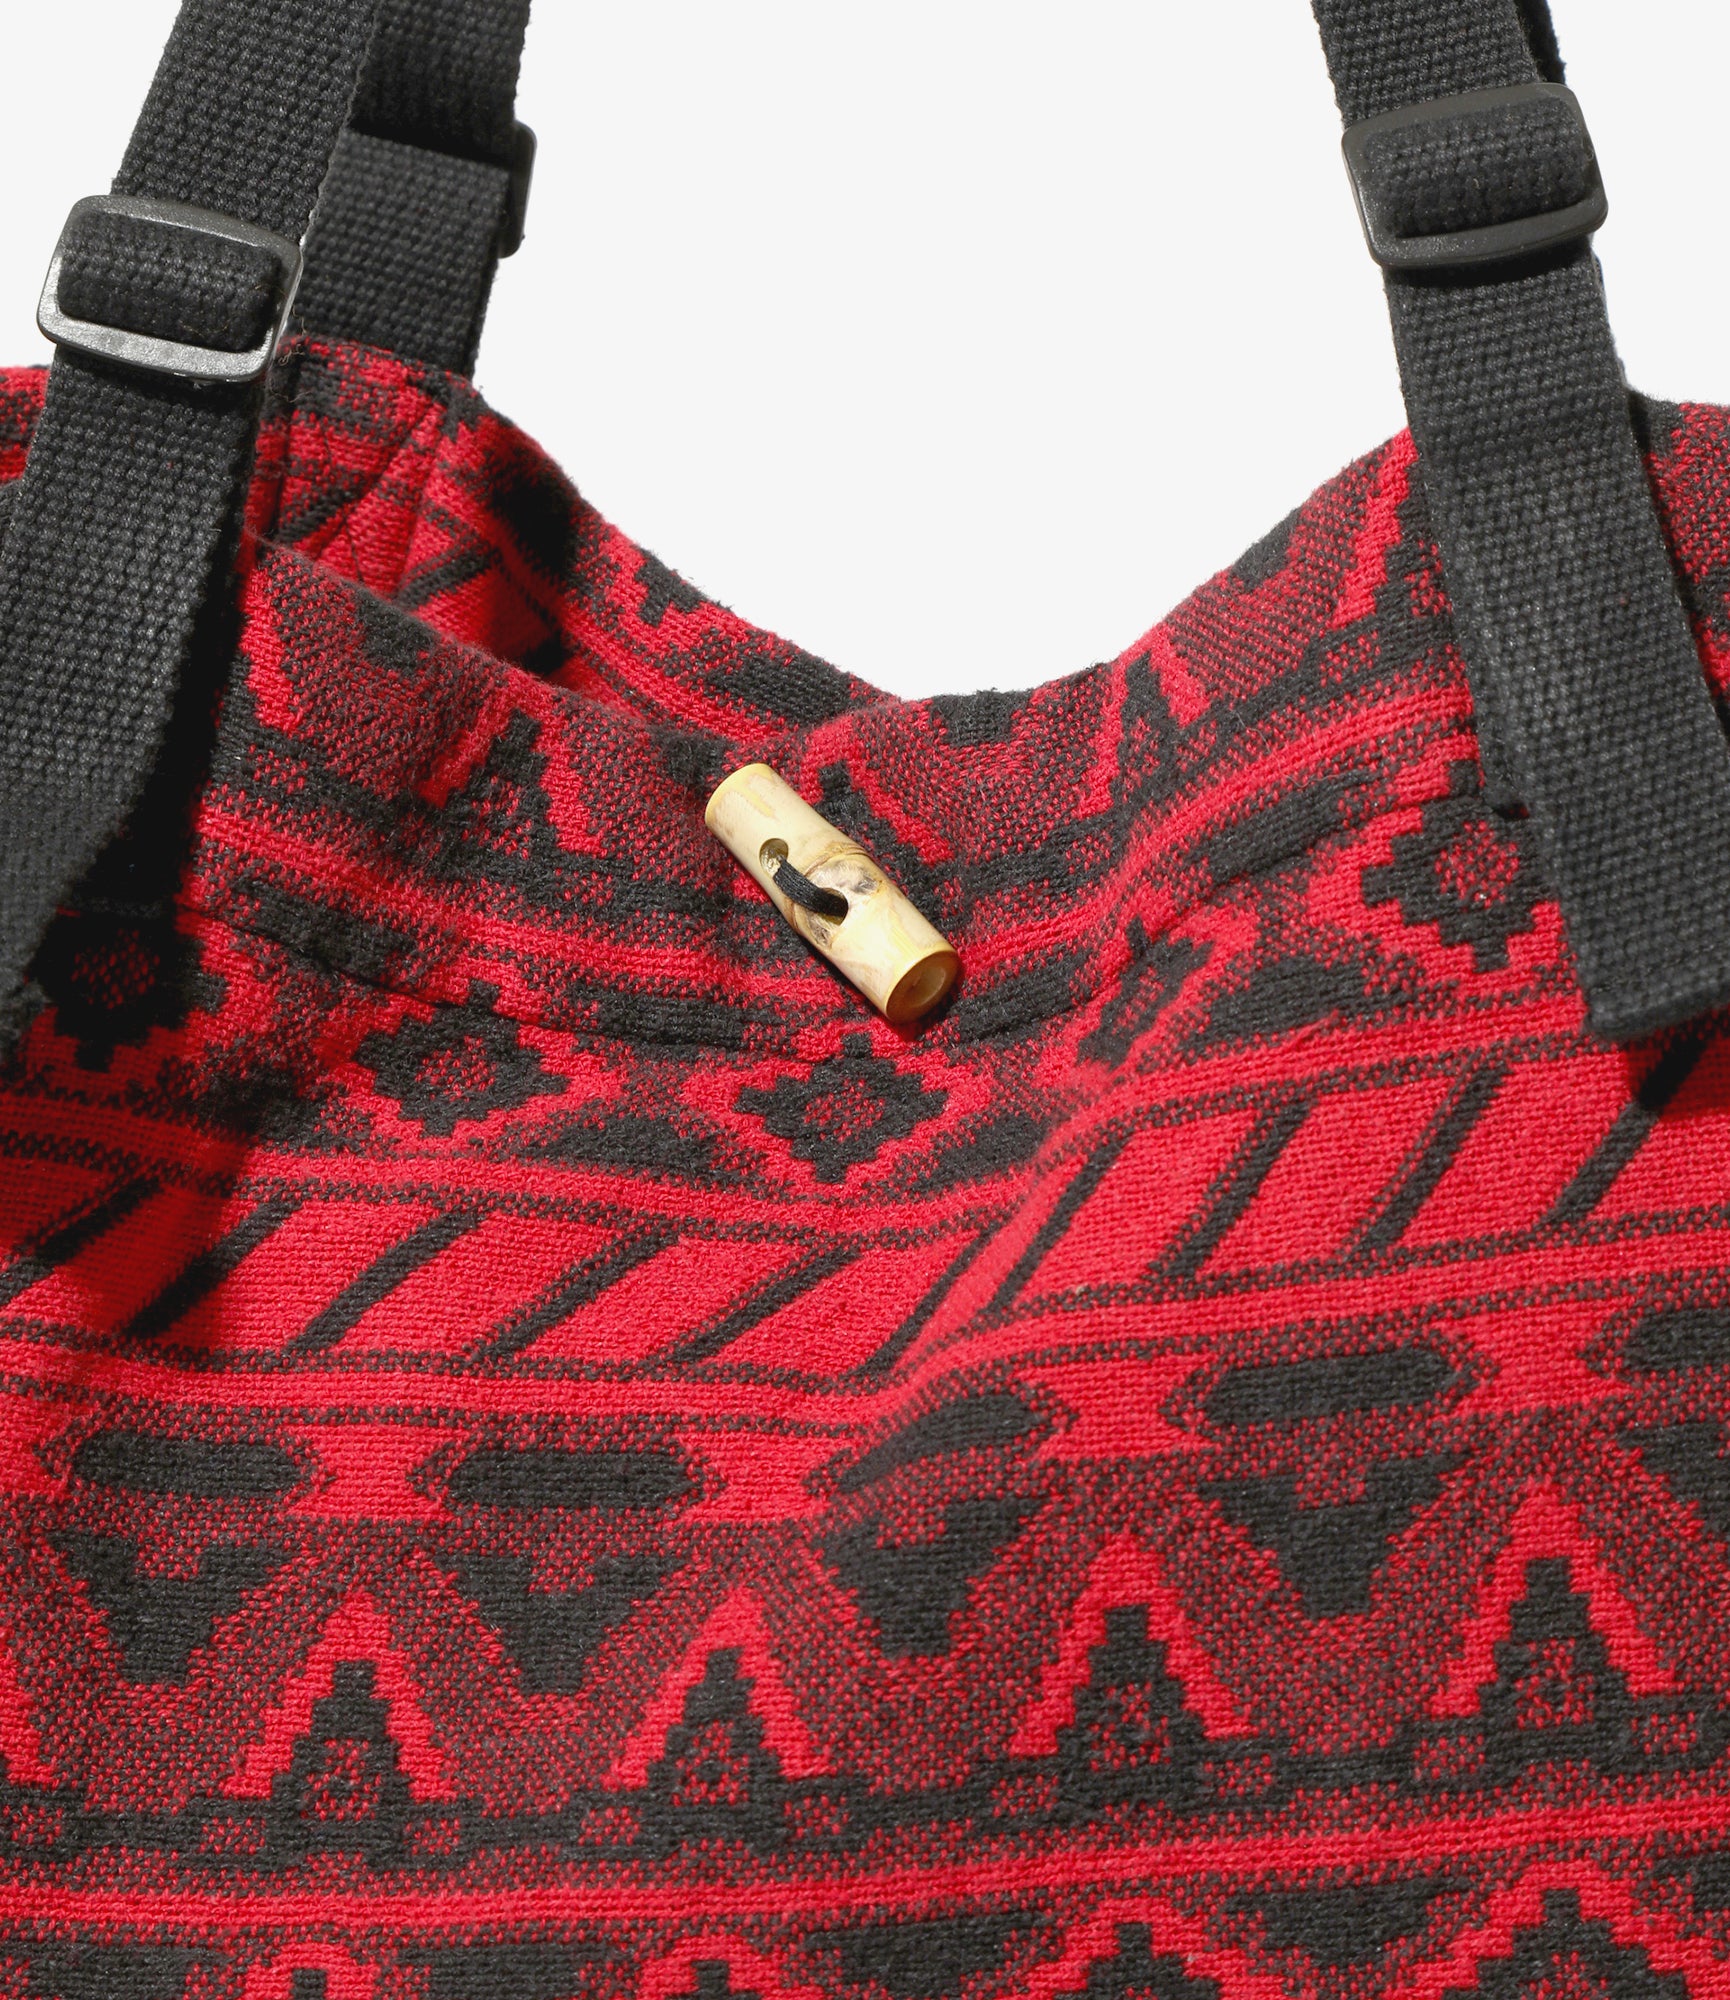 South2 West8 Canal Park Tote - Cotton Dobby / Native Pattern - Red/Black